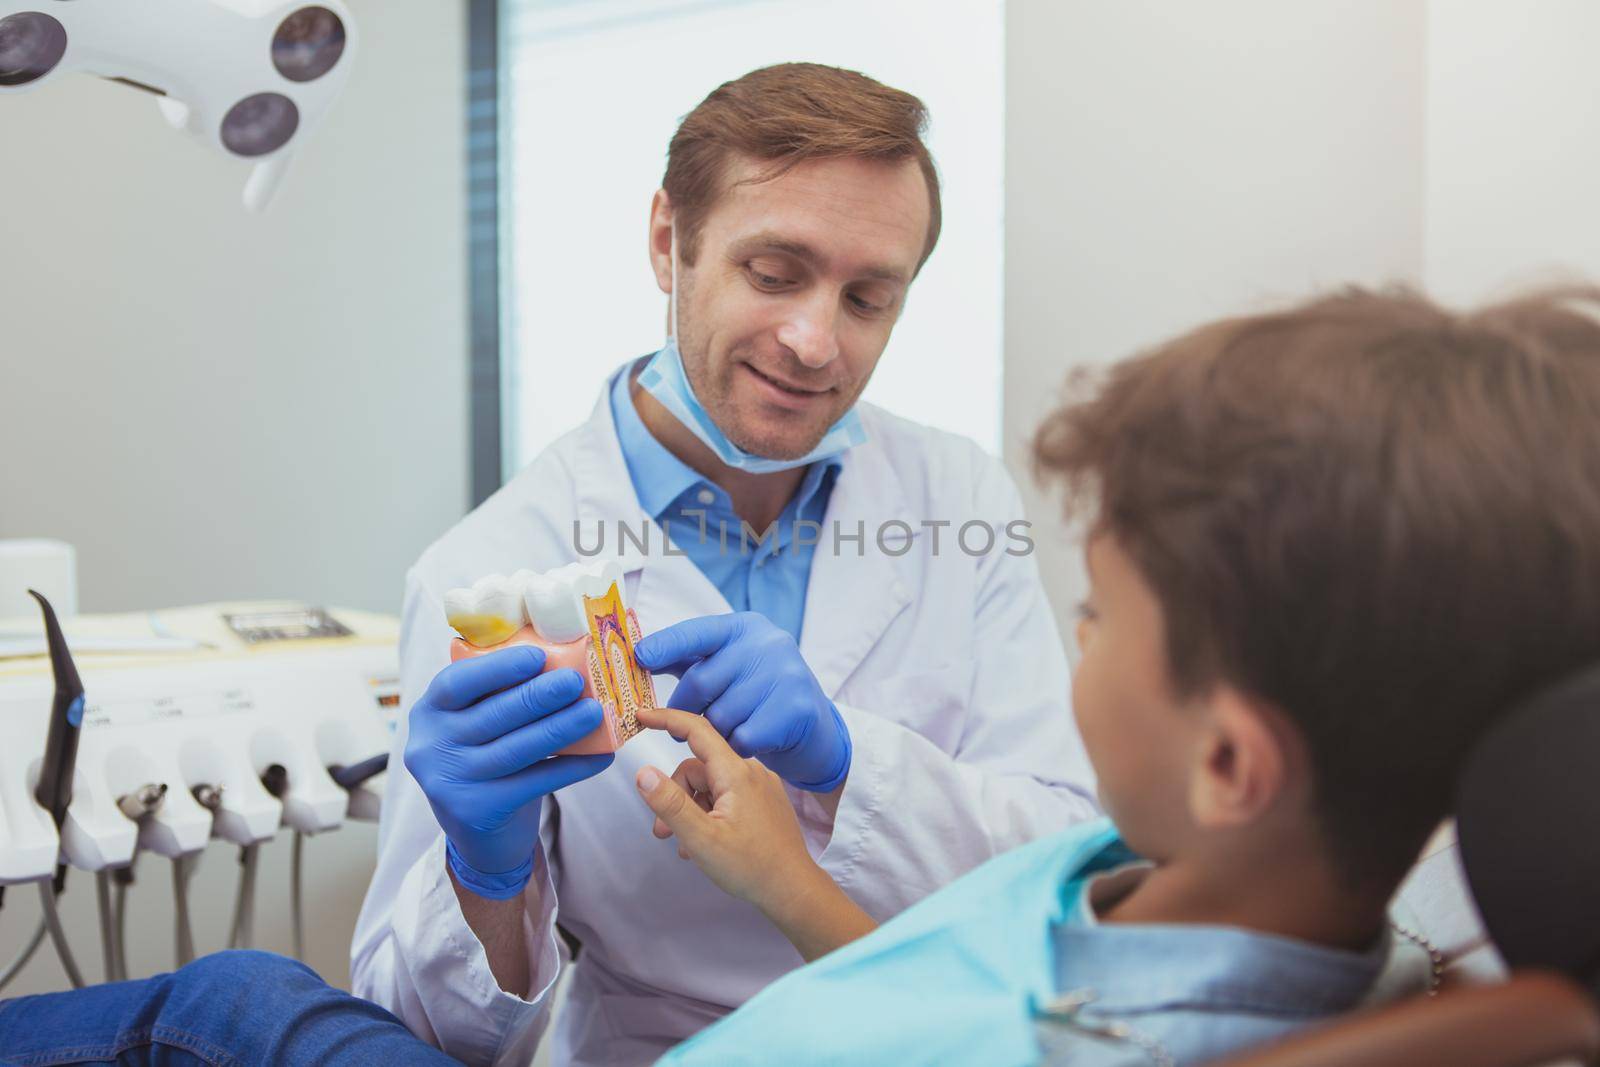 Experienced friendly dentist working at his clinic, talking to the patient, showing tooth model.Cheerful male dentist educating child about dental hygiene